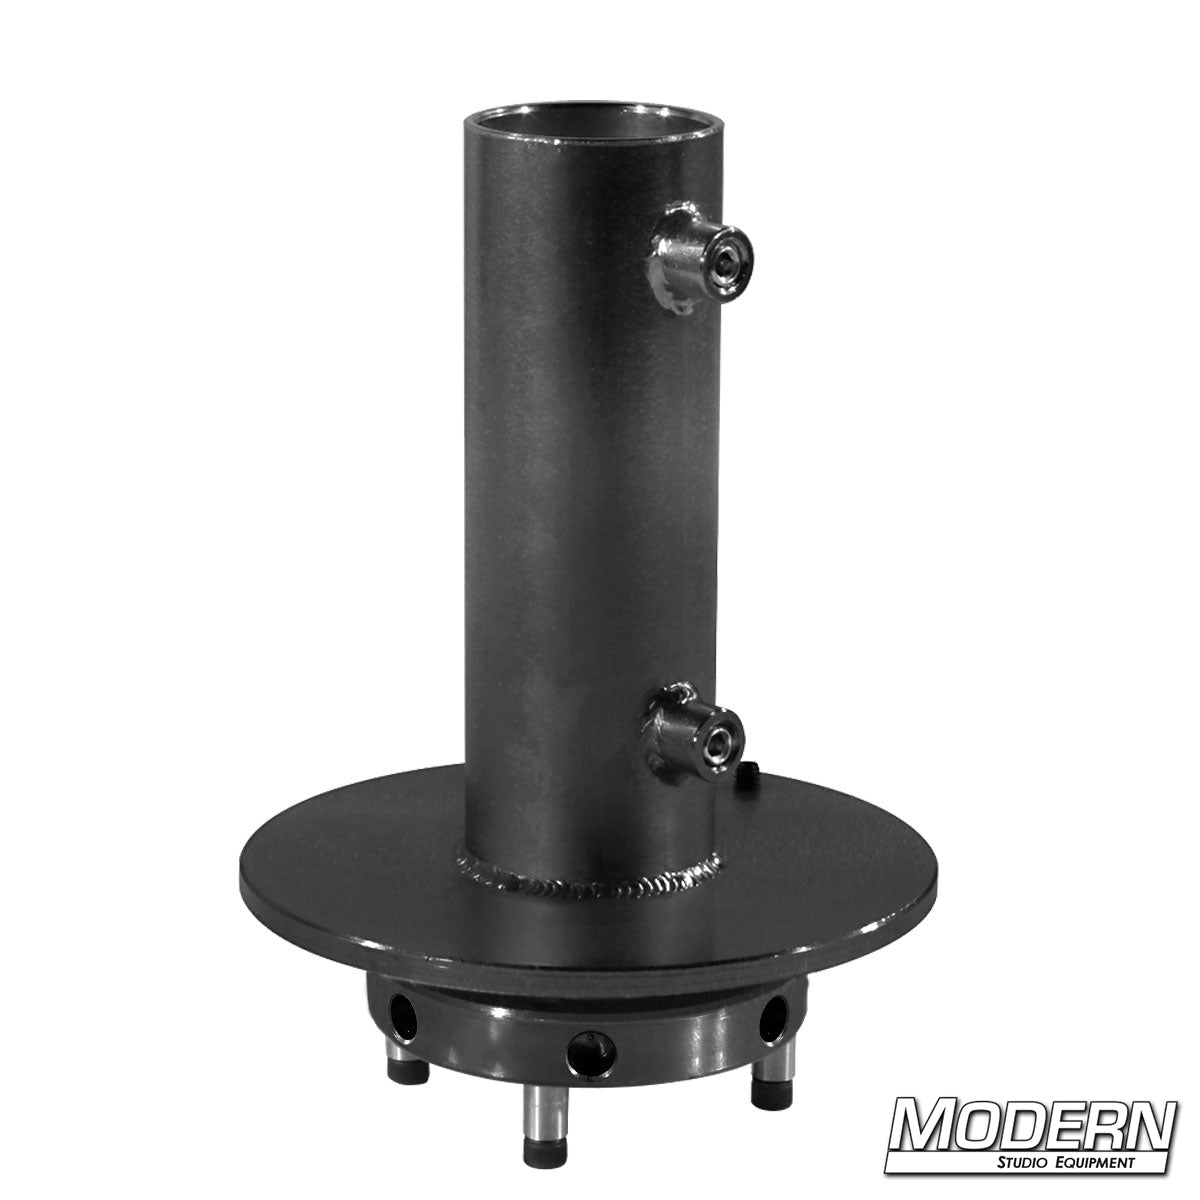 Mitchell to 1-1/2" Adapter